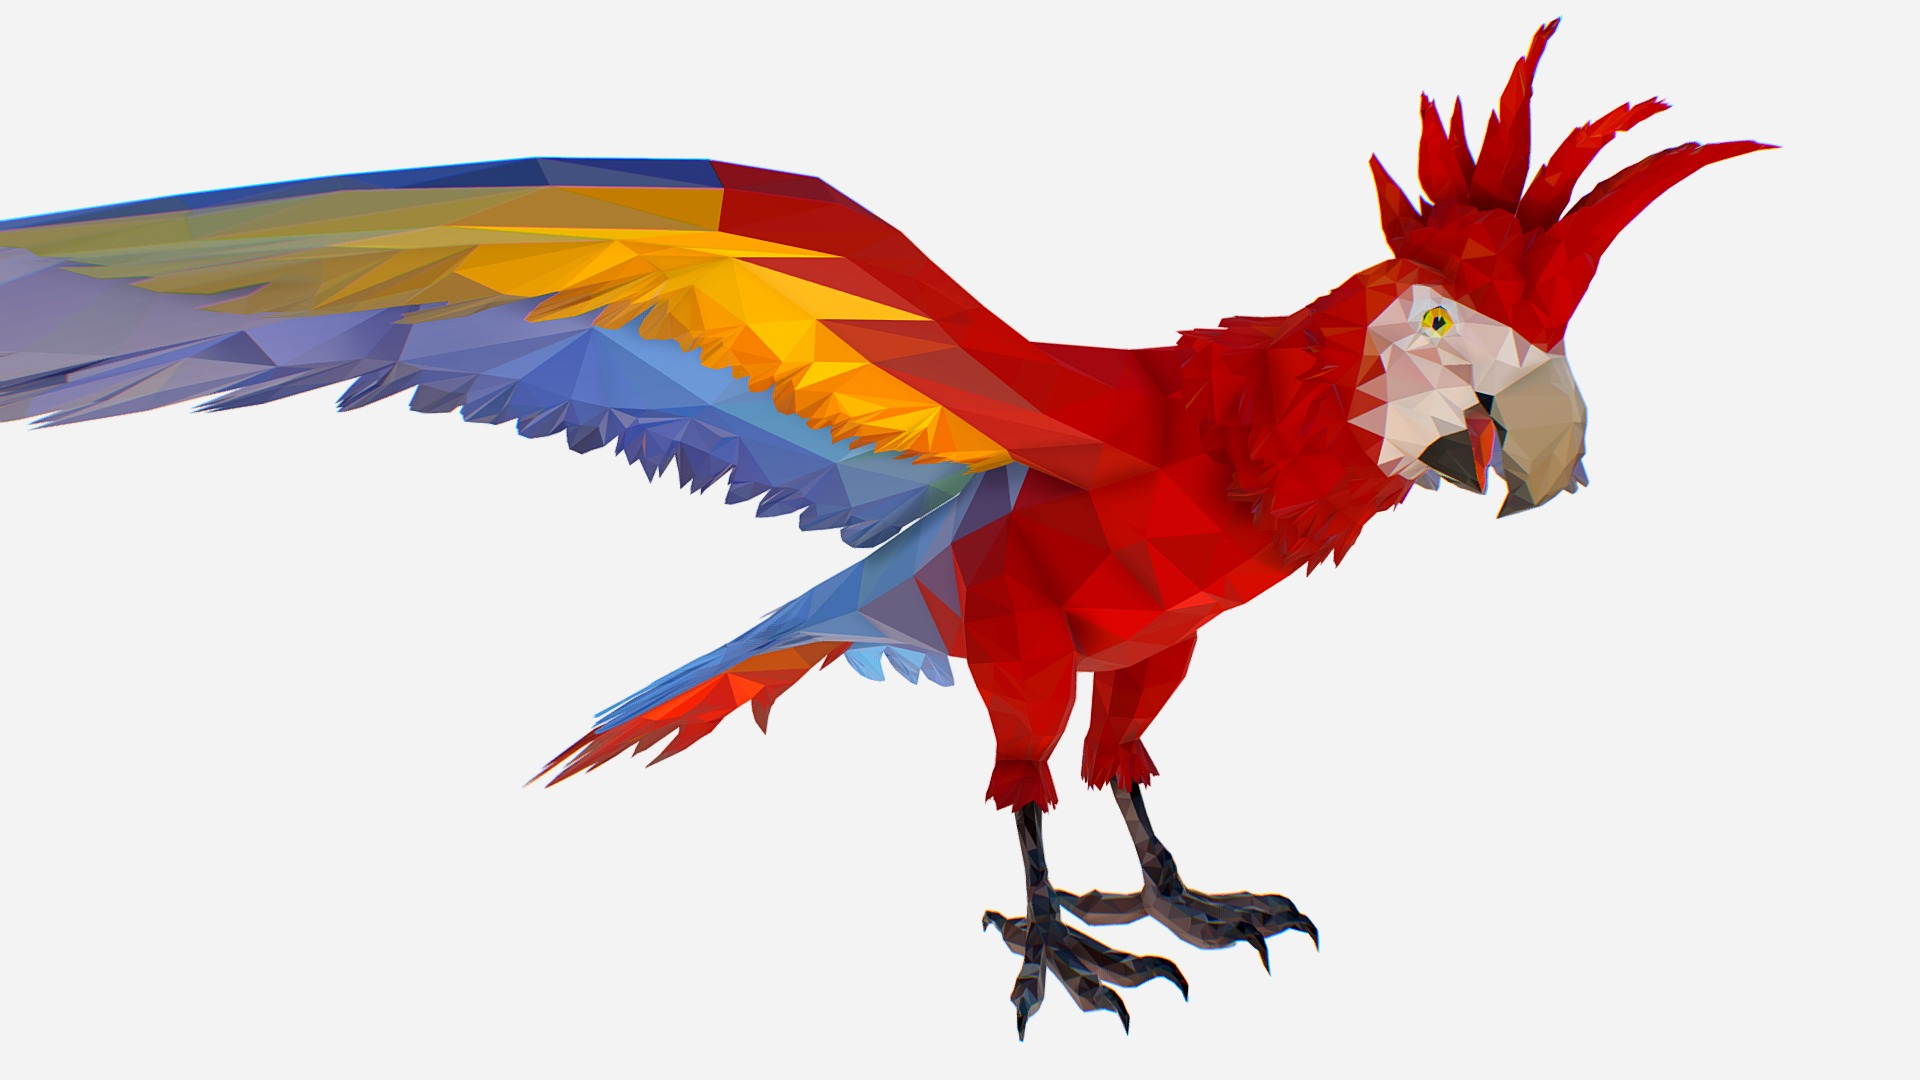 3D model low poly art Red Parrot Bird - This is a 3D model of the low poly art Red Parrot Bird. The 3D model is about chart.